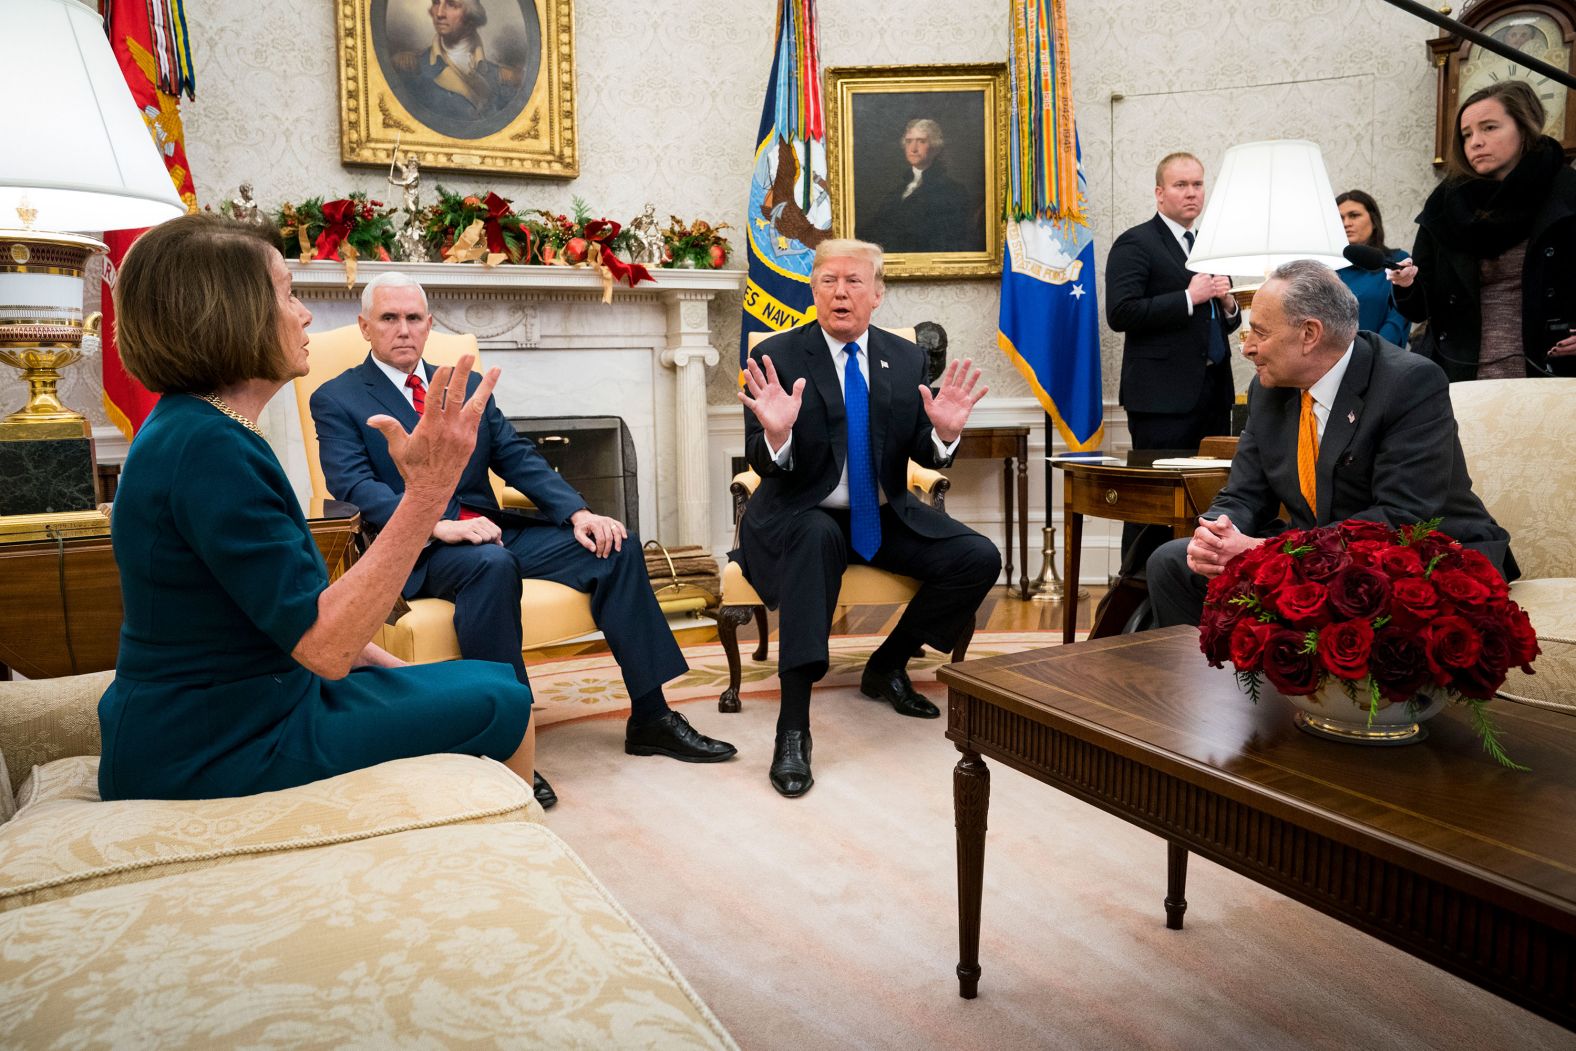 President Donald Trump and Vice President Mike Pence meet with Pelosi and Senate Minority Leader Chuck Schumer in the Oval Office at the White House in 2018. <a href="index.php?page=&url=https%3A%2F%2Fwww.cnn.com%2F2018%2F12%2F12%2Fpolitics%2Fgallery%2Ftrump-pelosi-schumer-oval-office" target="_blank">They clashed</a> over funding for the border wall and the prospects of a government shutdown.